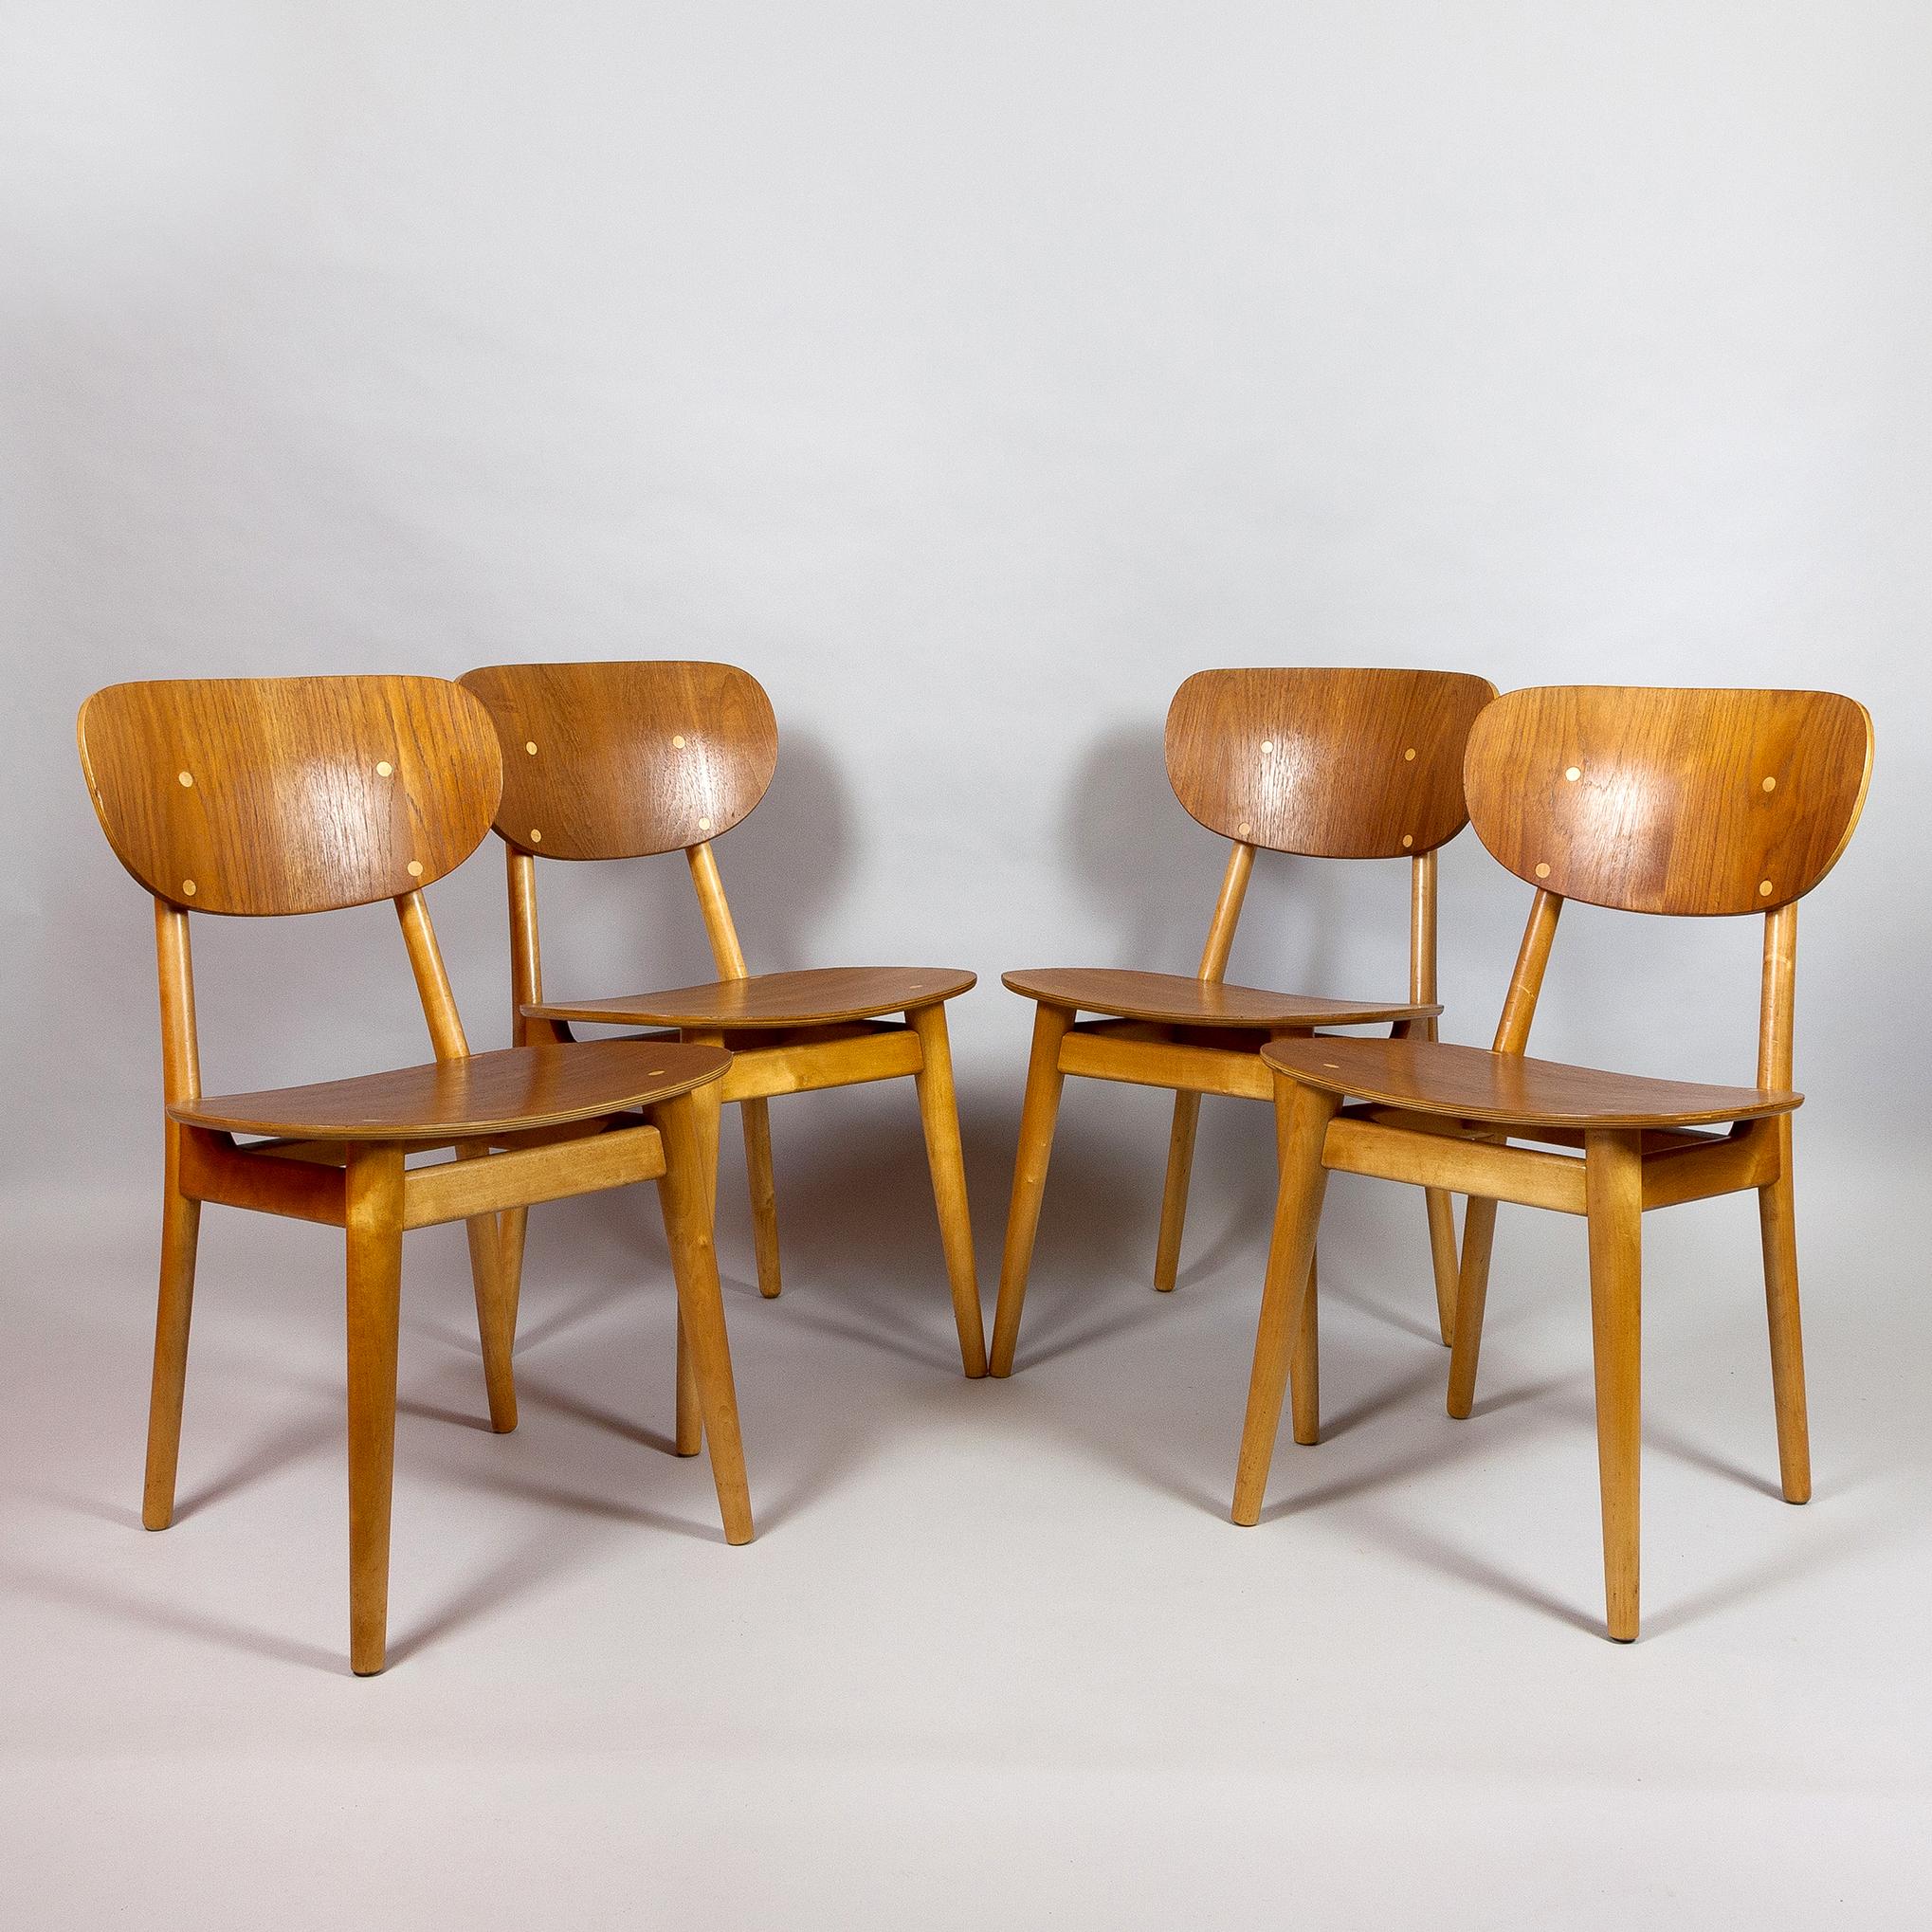 Set of four dining chairs, Model SB-11, designed by Cees Braakman for Pastoe in maple and teak. Excellent condition with some signs of wear commensurate with age. Fully restored. Netherlands, 1950s.